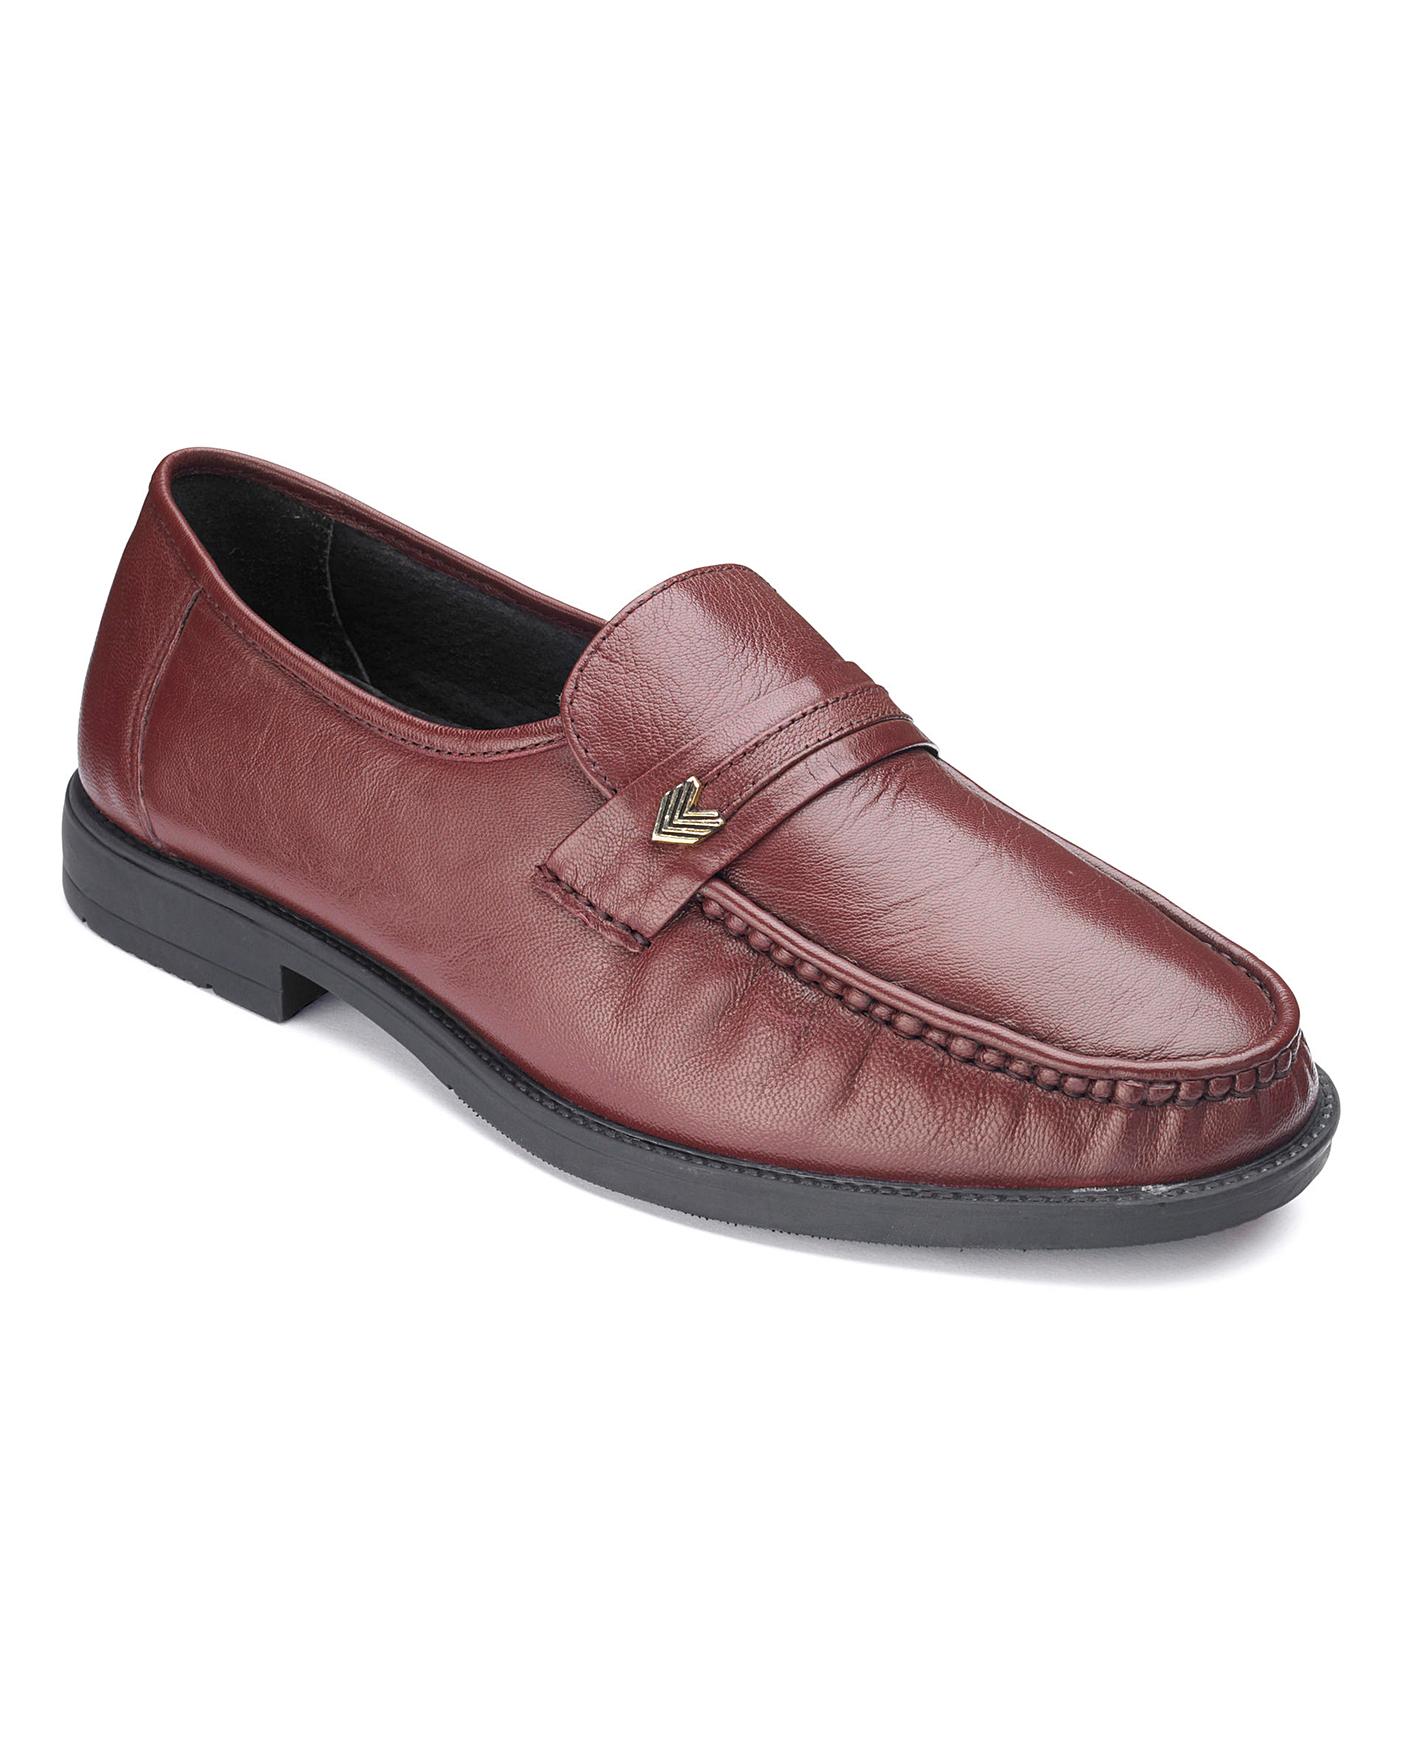 Trustyle Slip On Shoes Standard Fit